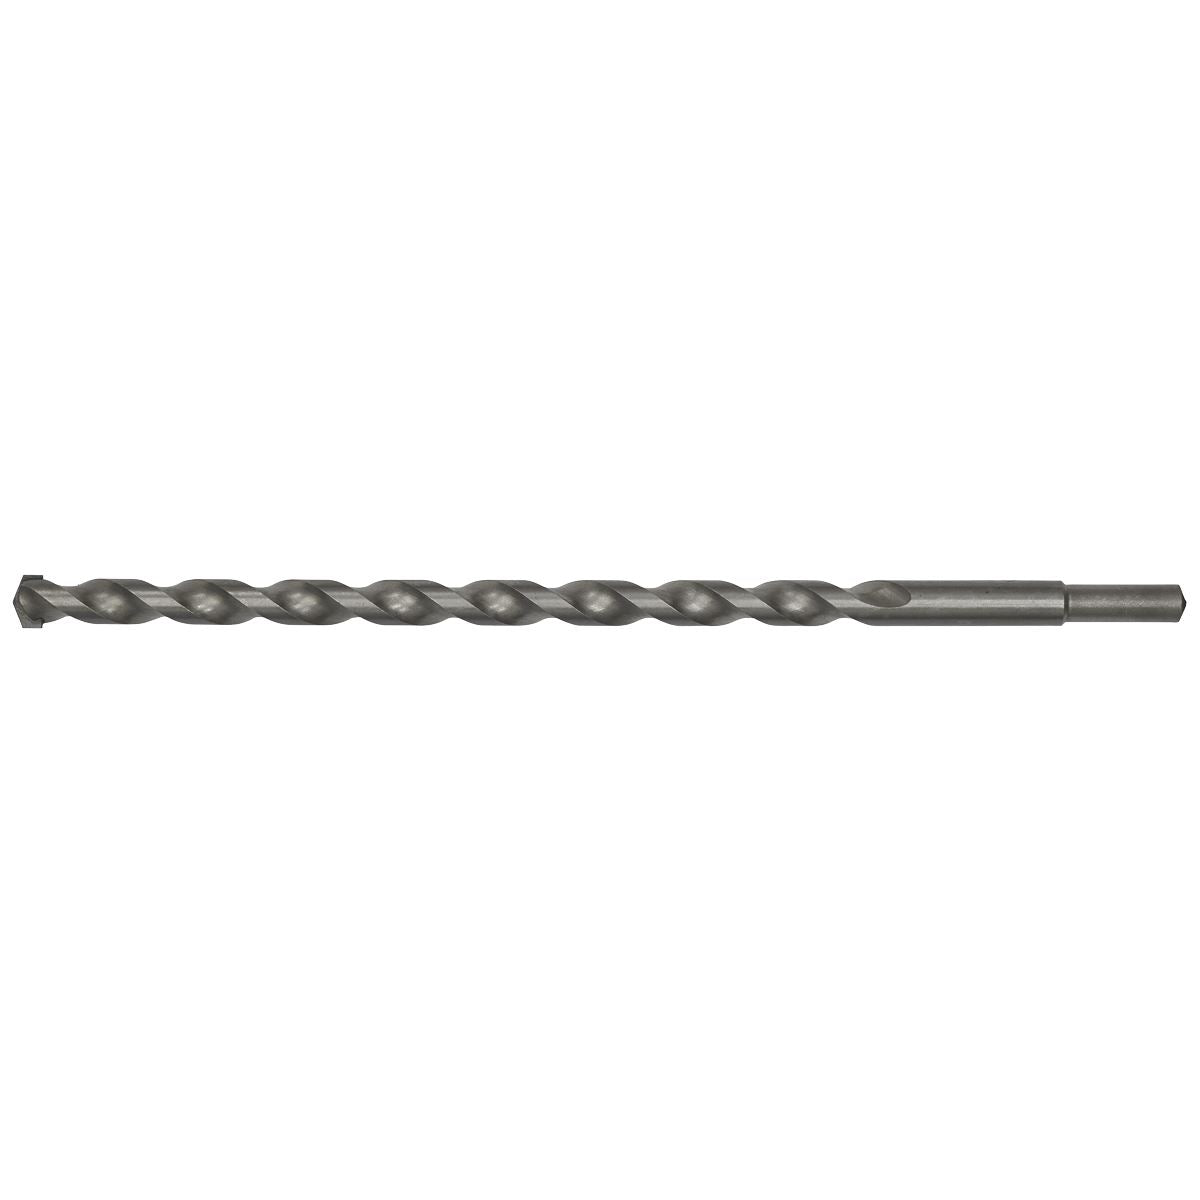 Worksafe by Sealey Straight Shank Rotary Impact Drill Bit Ø16 x 300mm